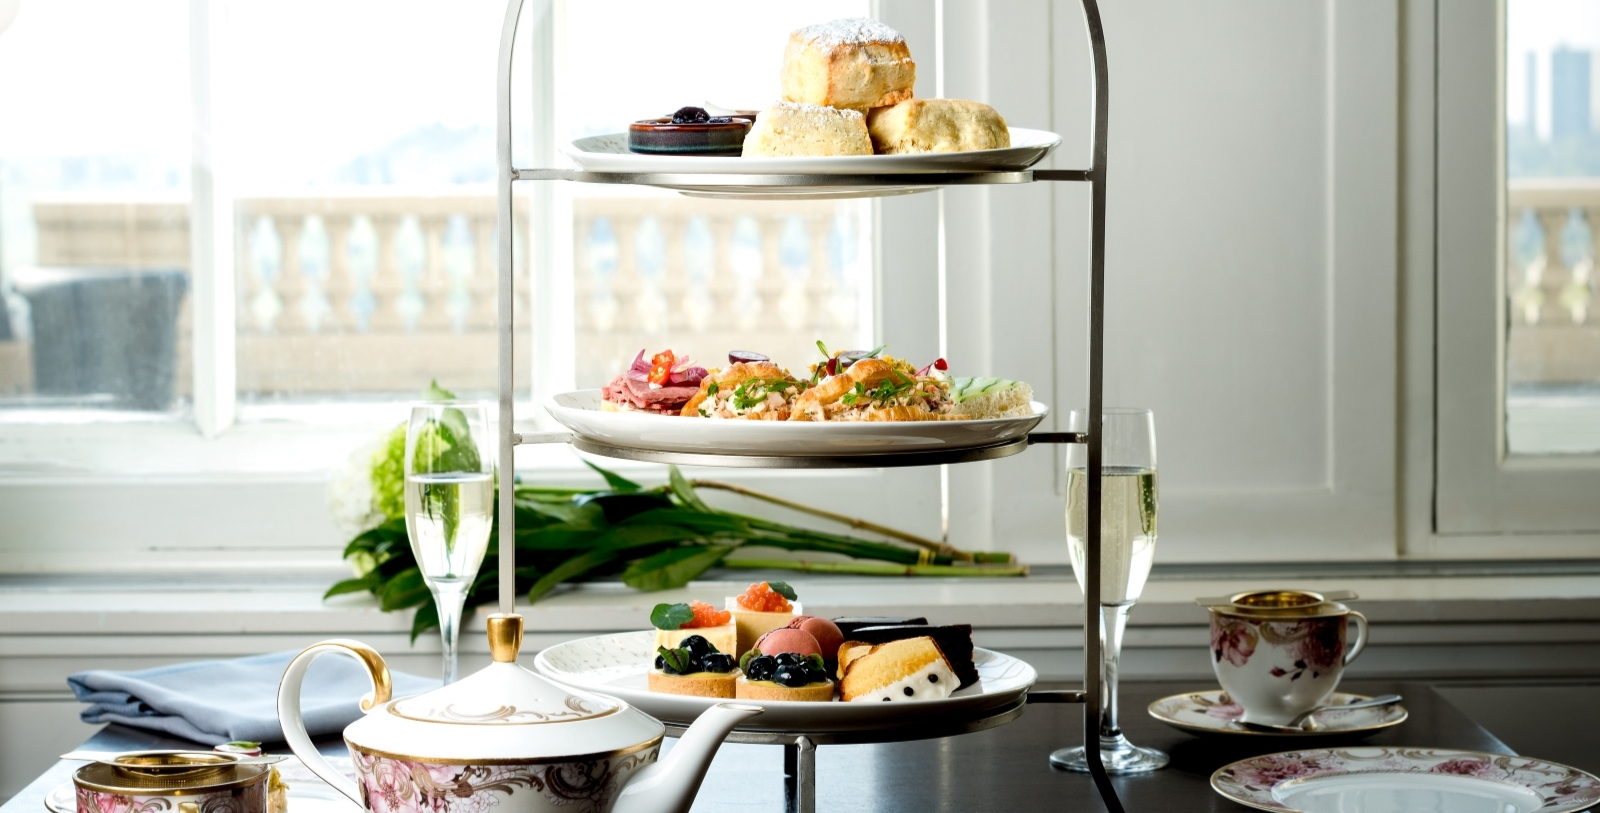 Taste the soothing loose leaf blends and an assortment of signature sandwiches and pastries at the hotel's Royal Afternoon Tea.